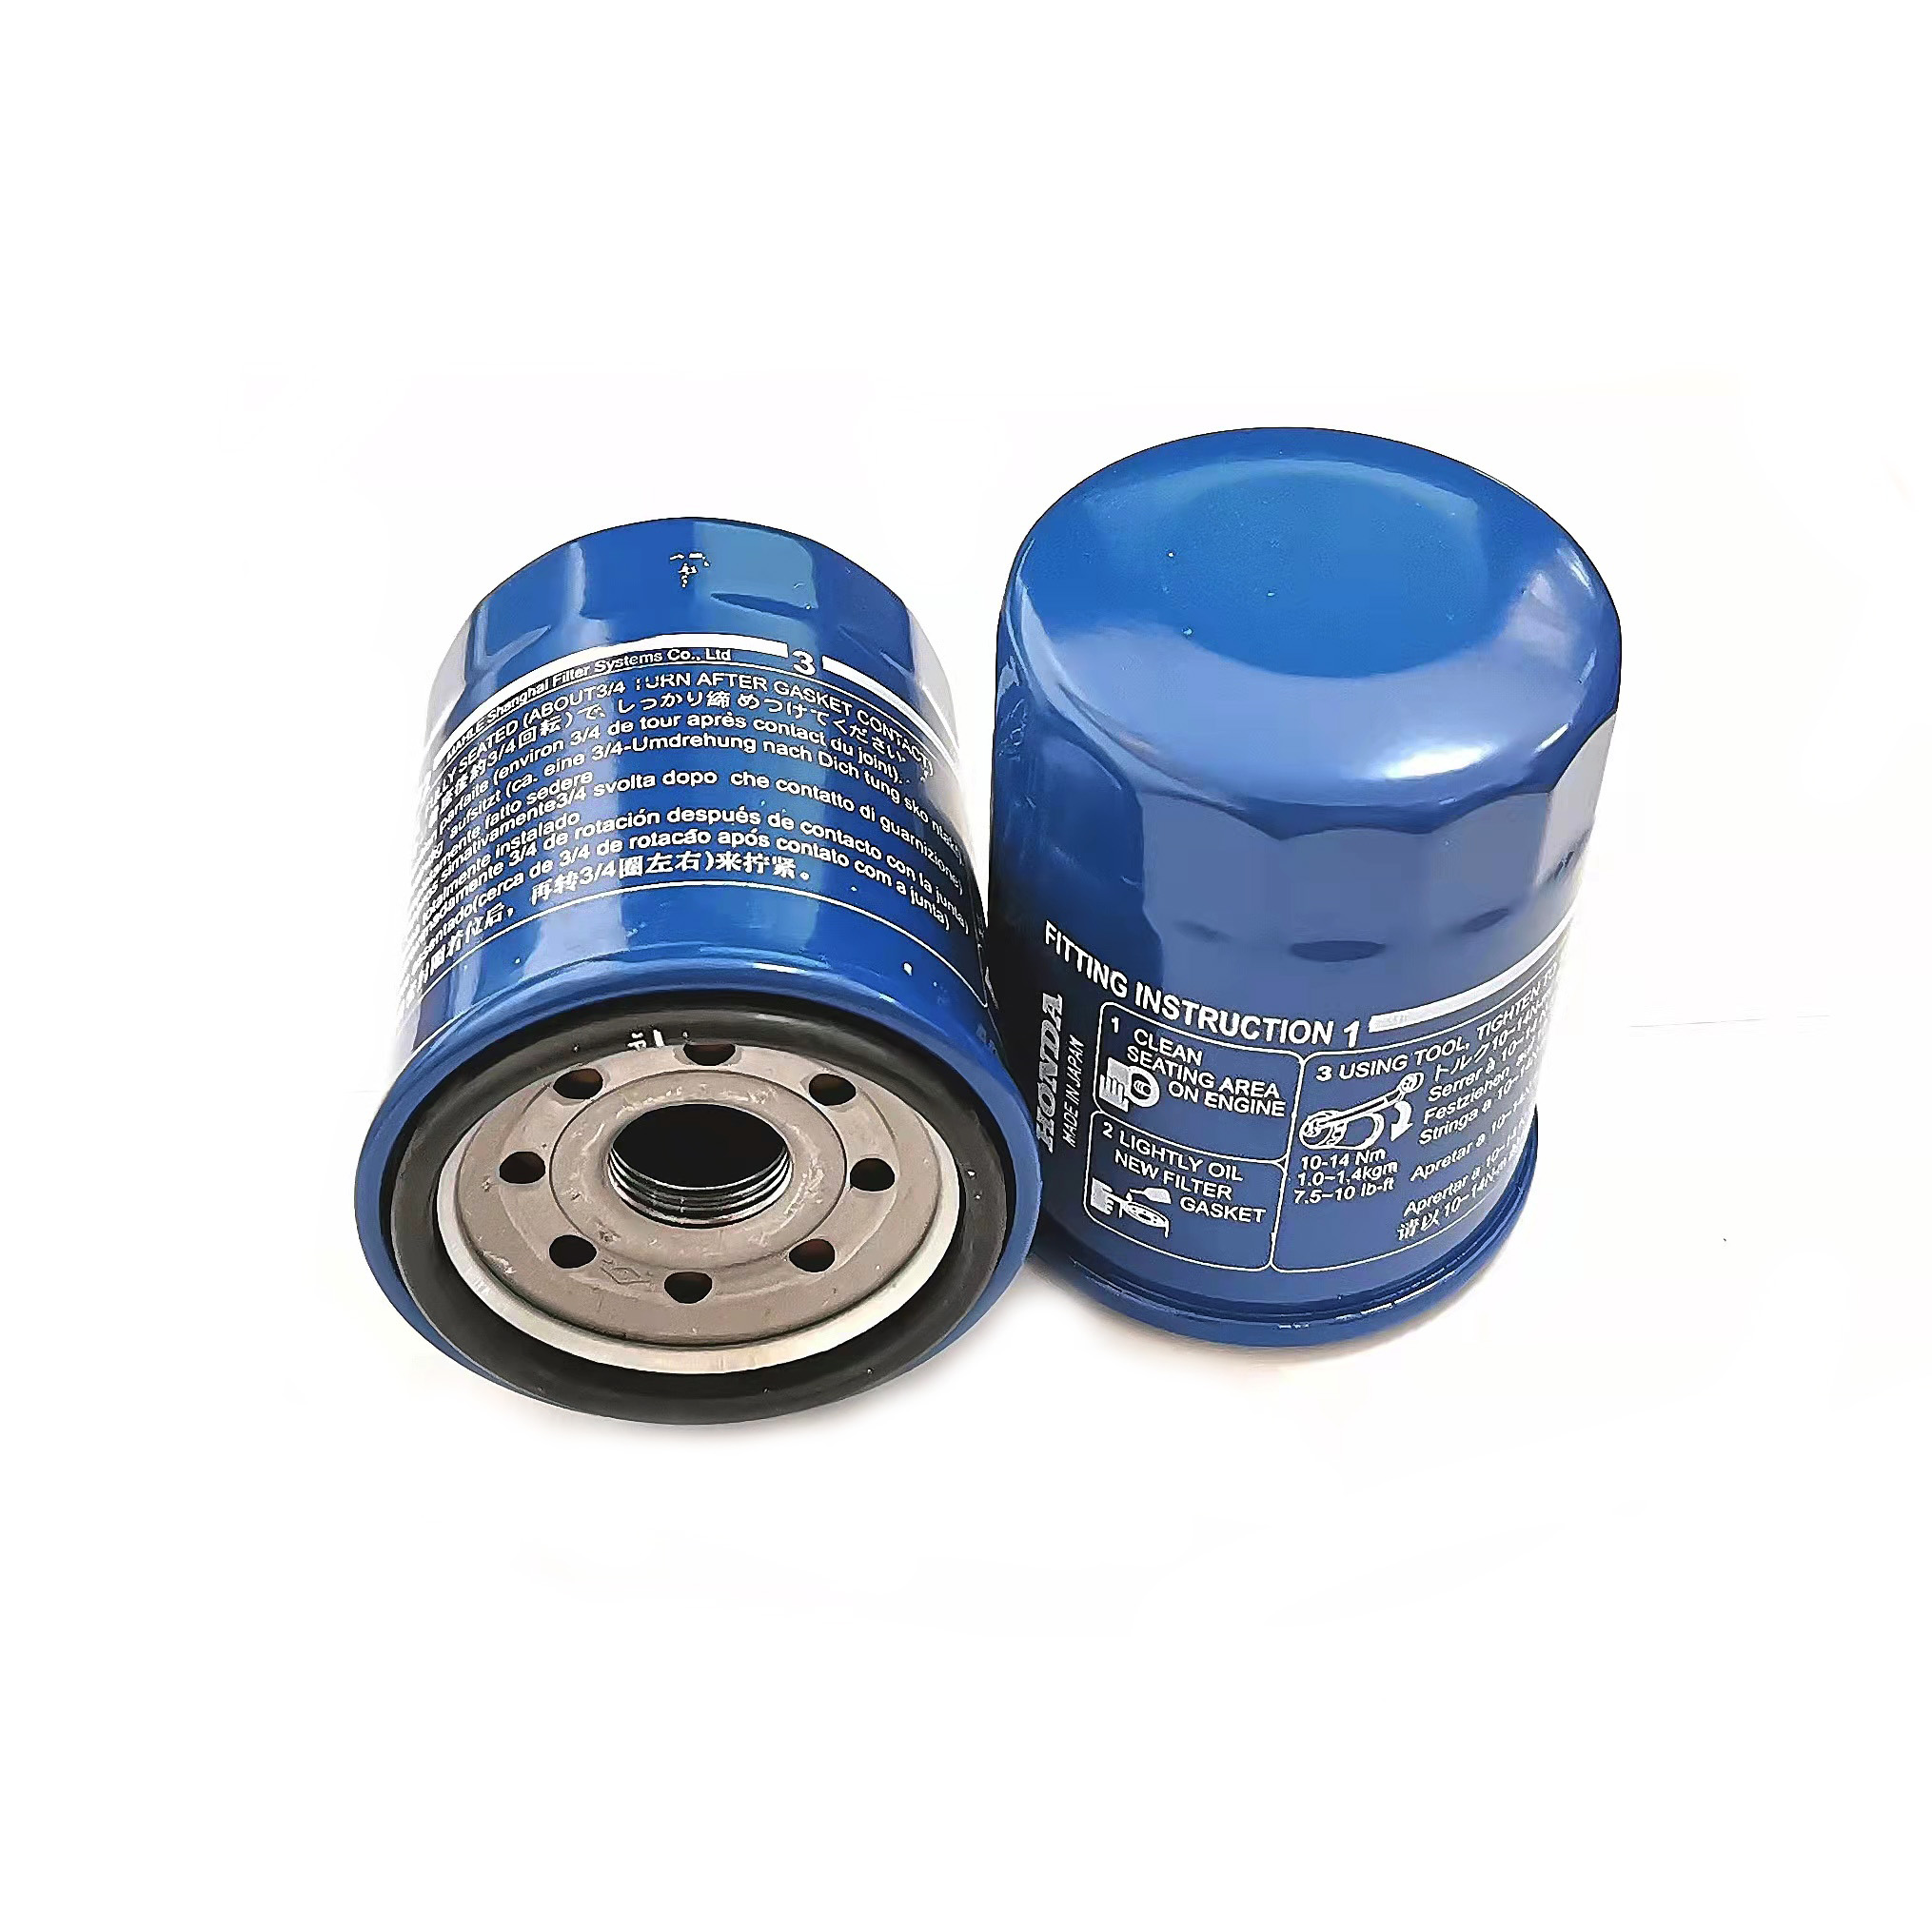 Oil Filter wholesale car engine oil filter price is reasonable 15400-PLC-004